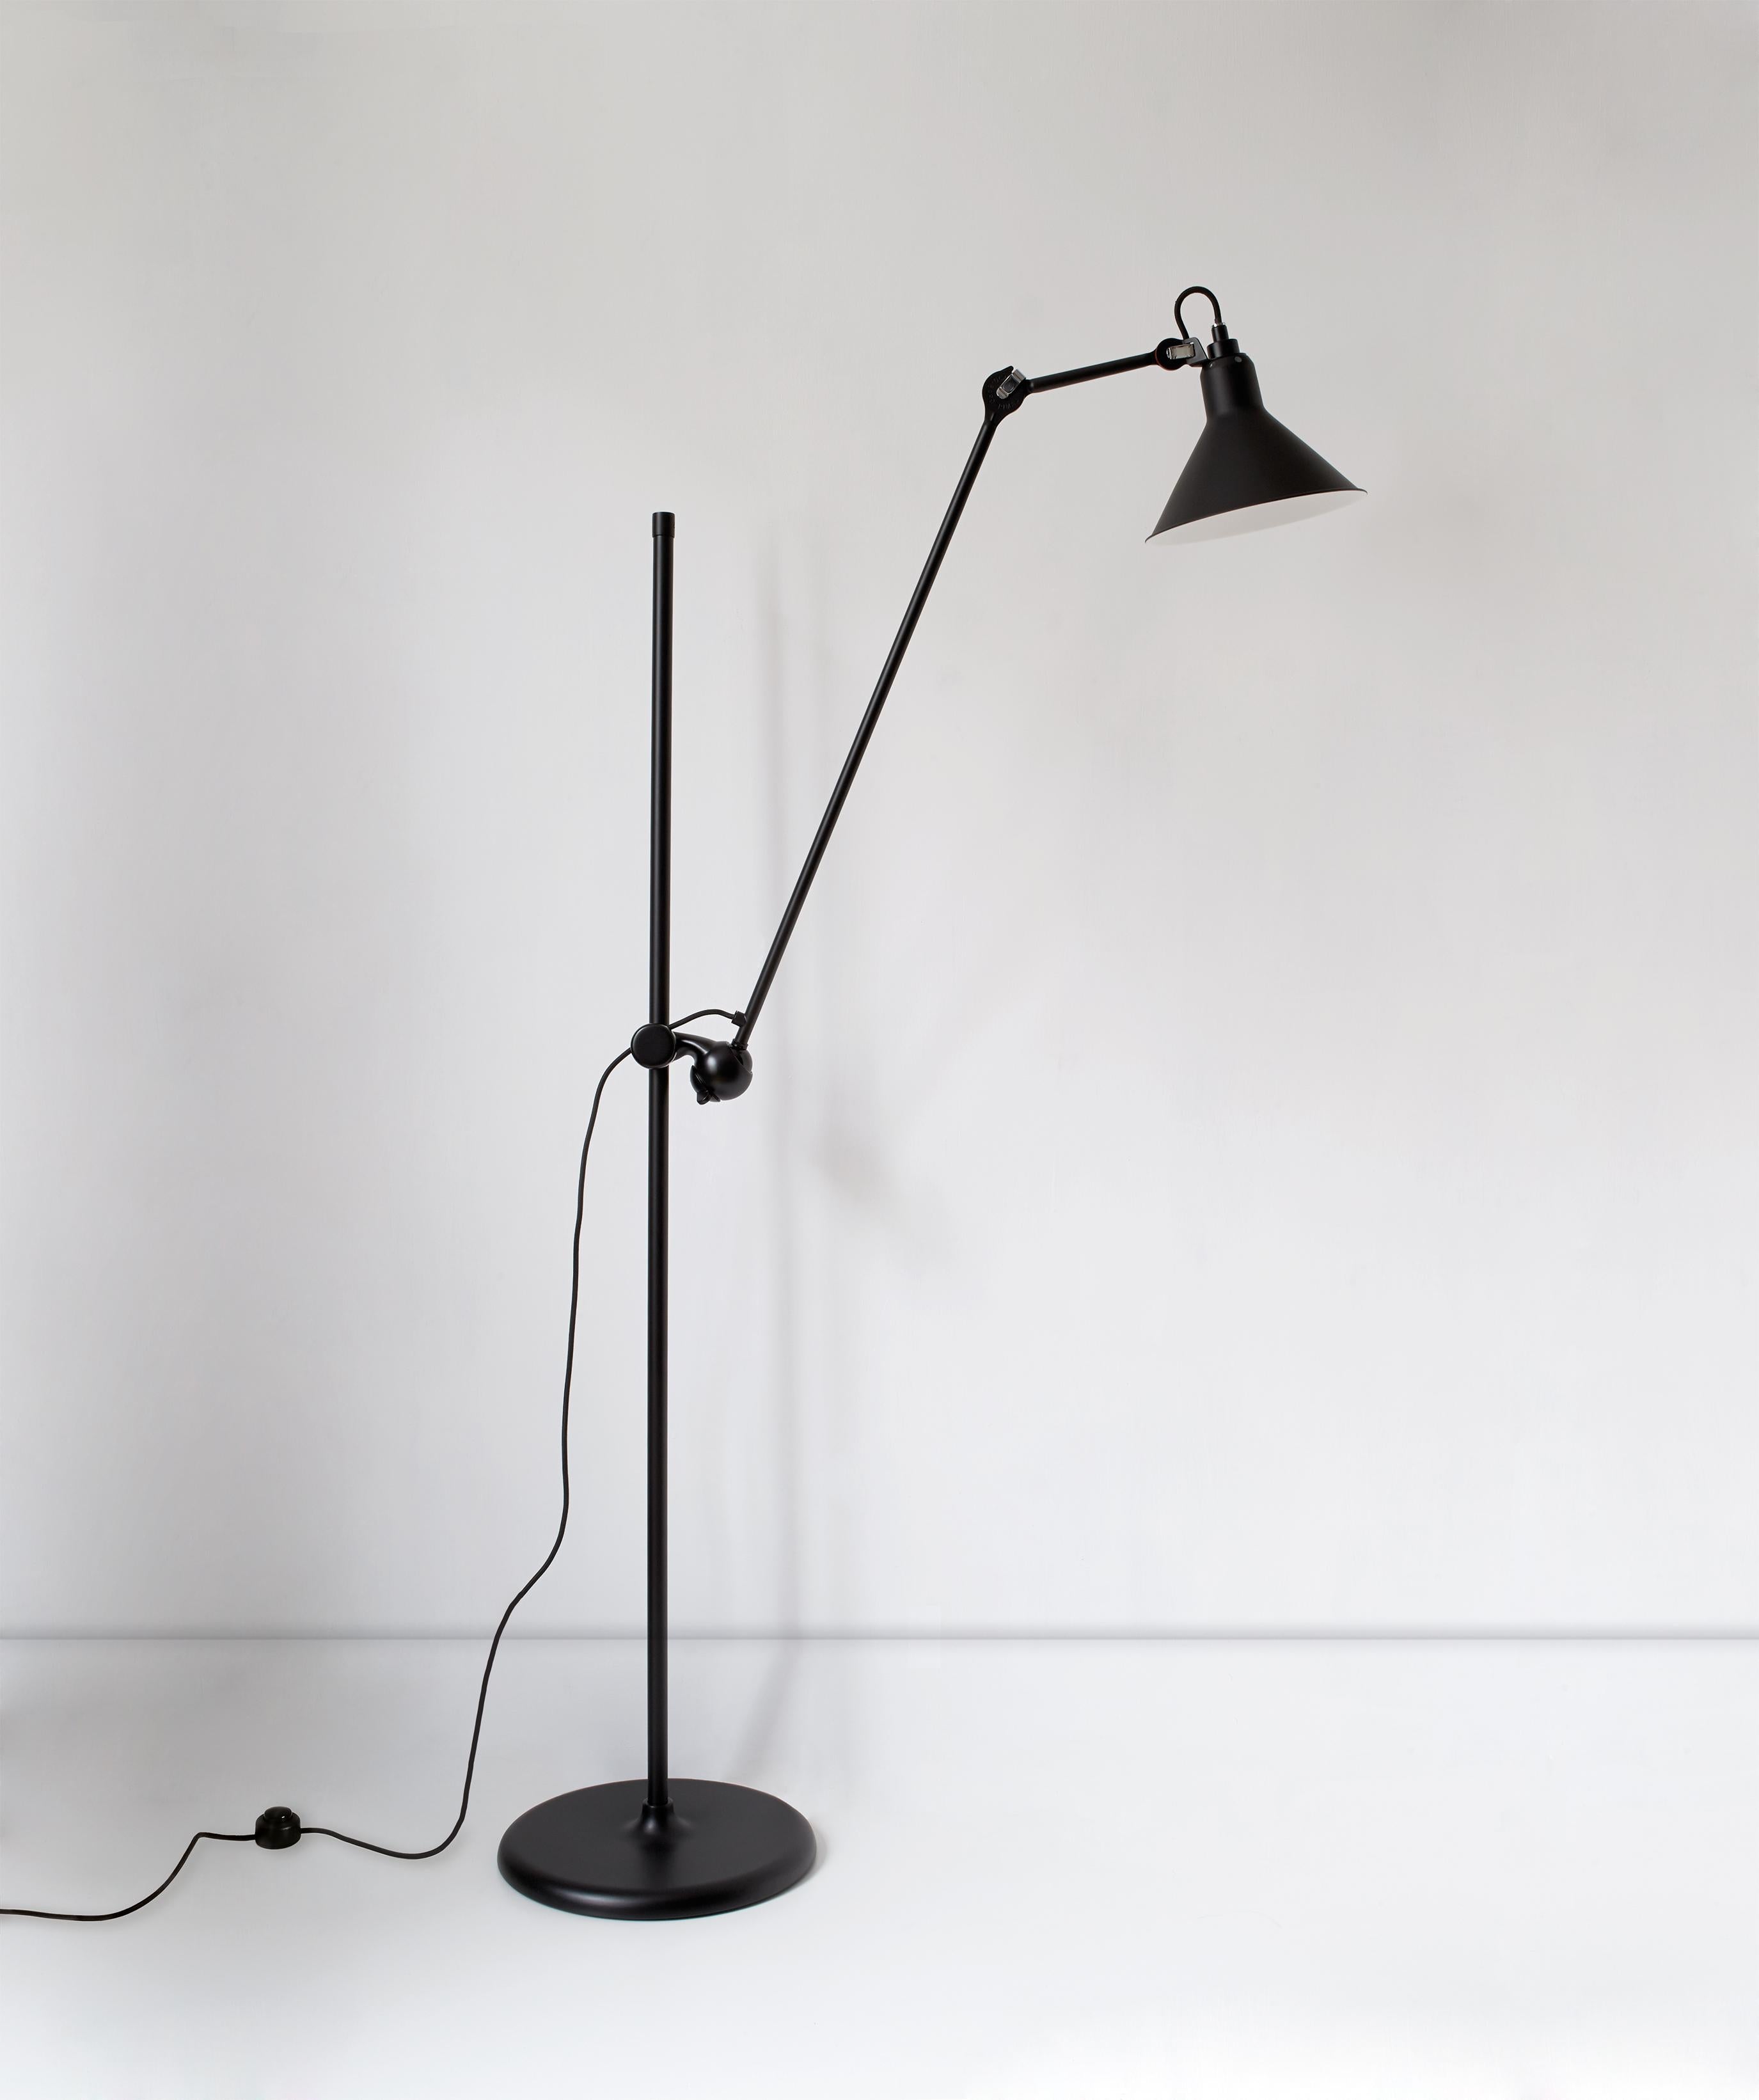 Lampe Gras N° 215 floor lamp by Bernard-Albin Gras
Dimensions: D 32 x W 32 x H 135 cm
Materials: Steel

All our lamps can be wired according to each country. If sold to the USA it will be wired for the USA for instance.

Steel floor lamp. Its